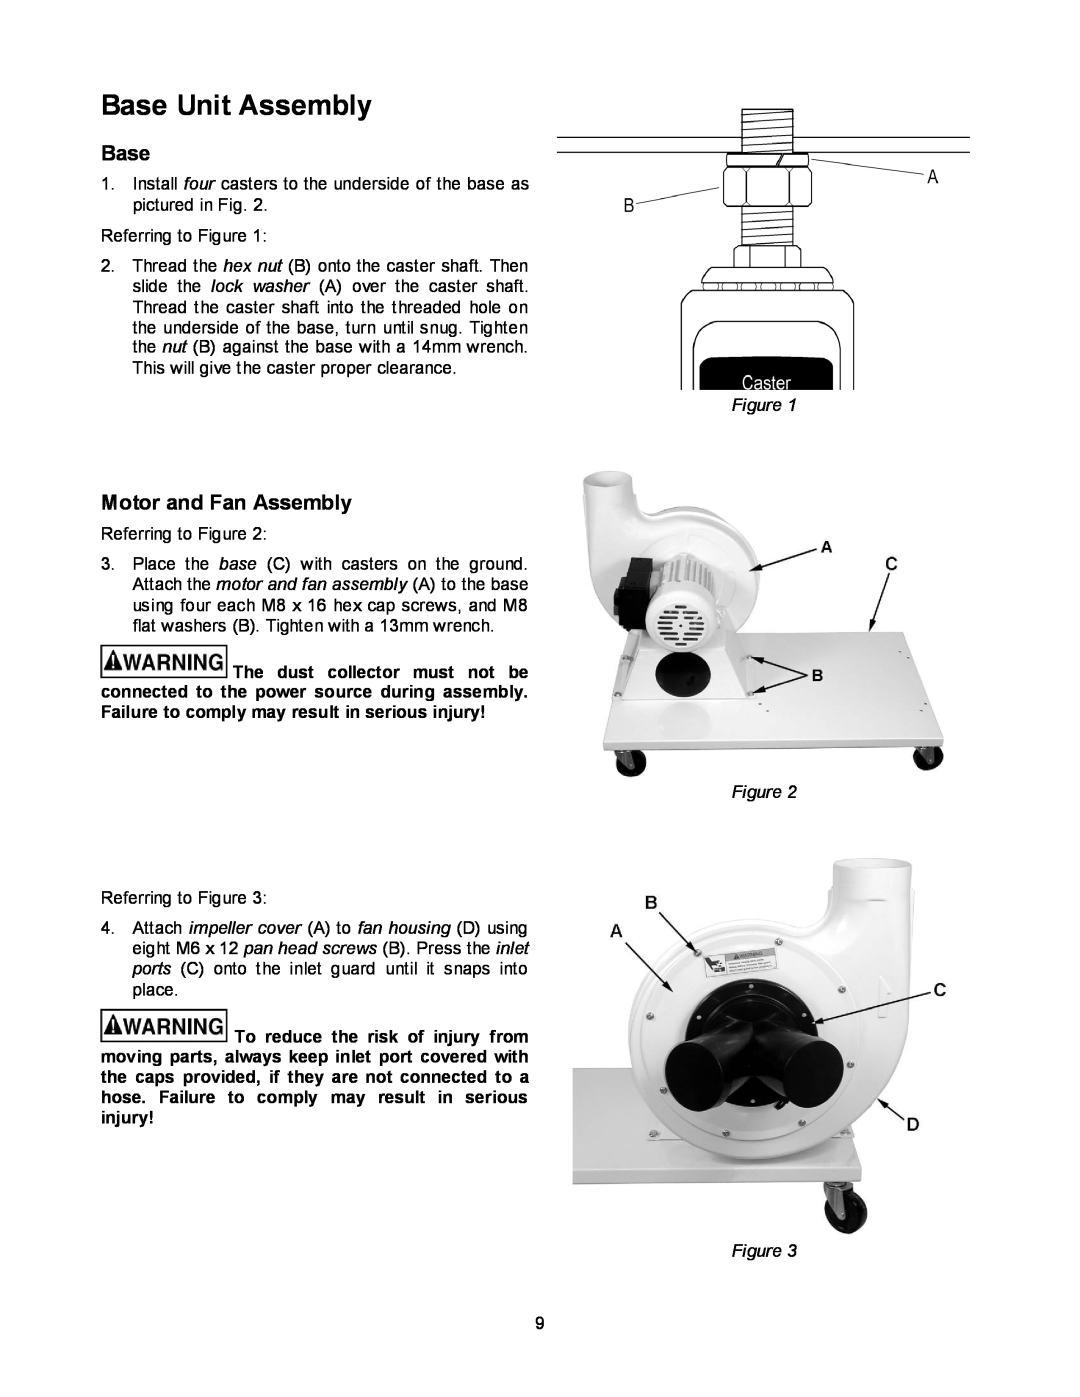 Jet Tools DC-1100CK operating instructions Base Unit Assembly, Motor and Fan Assembly 